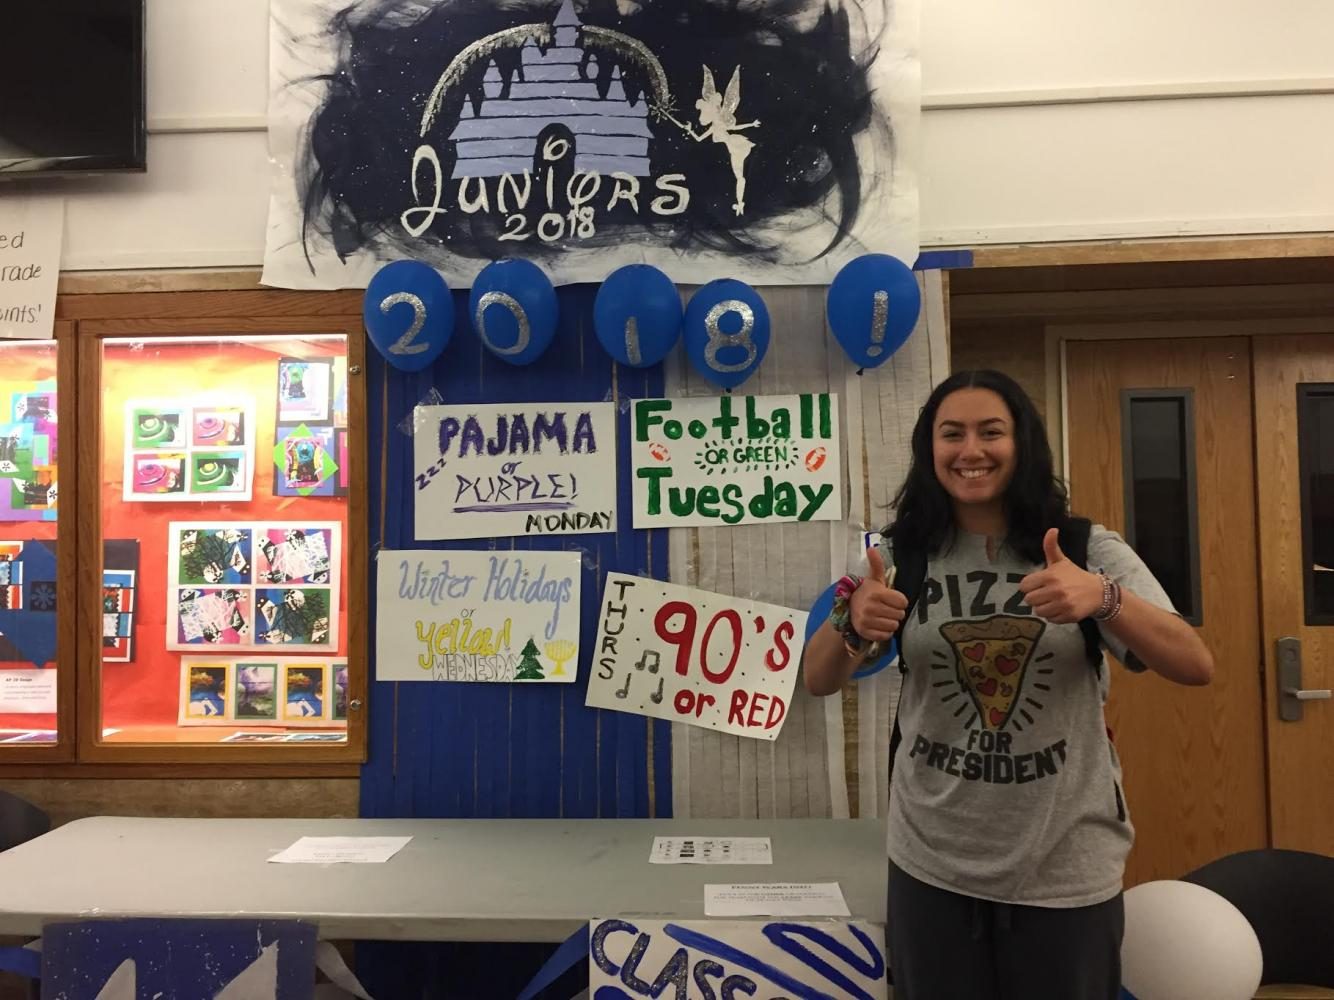 Junior+Lauren+Seltzer+poses+in+front+of+the+junior+table+for+the+first+day+of+Spirit+Week.+On+Monday%2C+students+wore+pajamas+to+school+to+earn+points+for+their+grade.